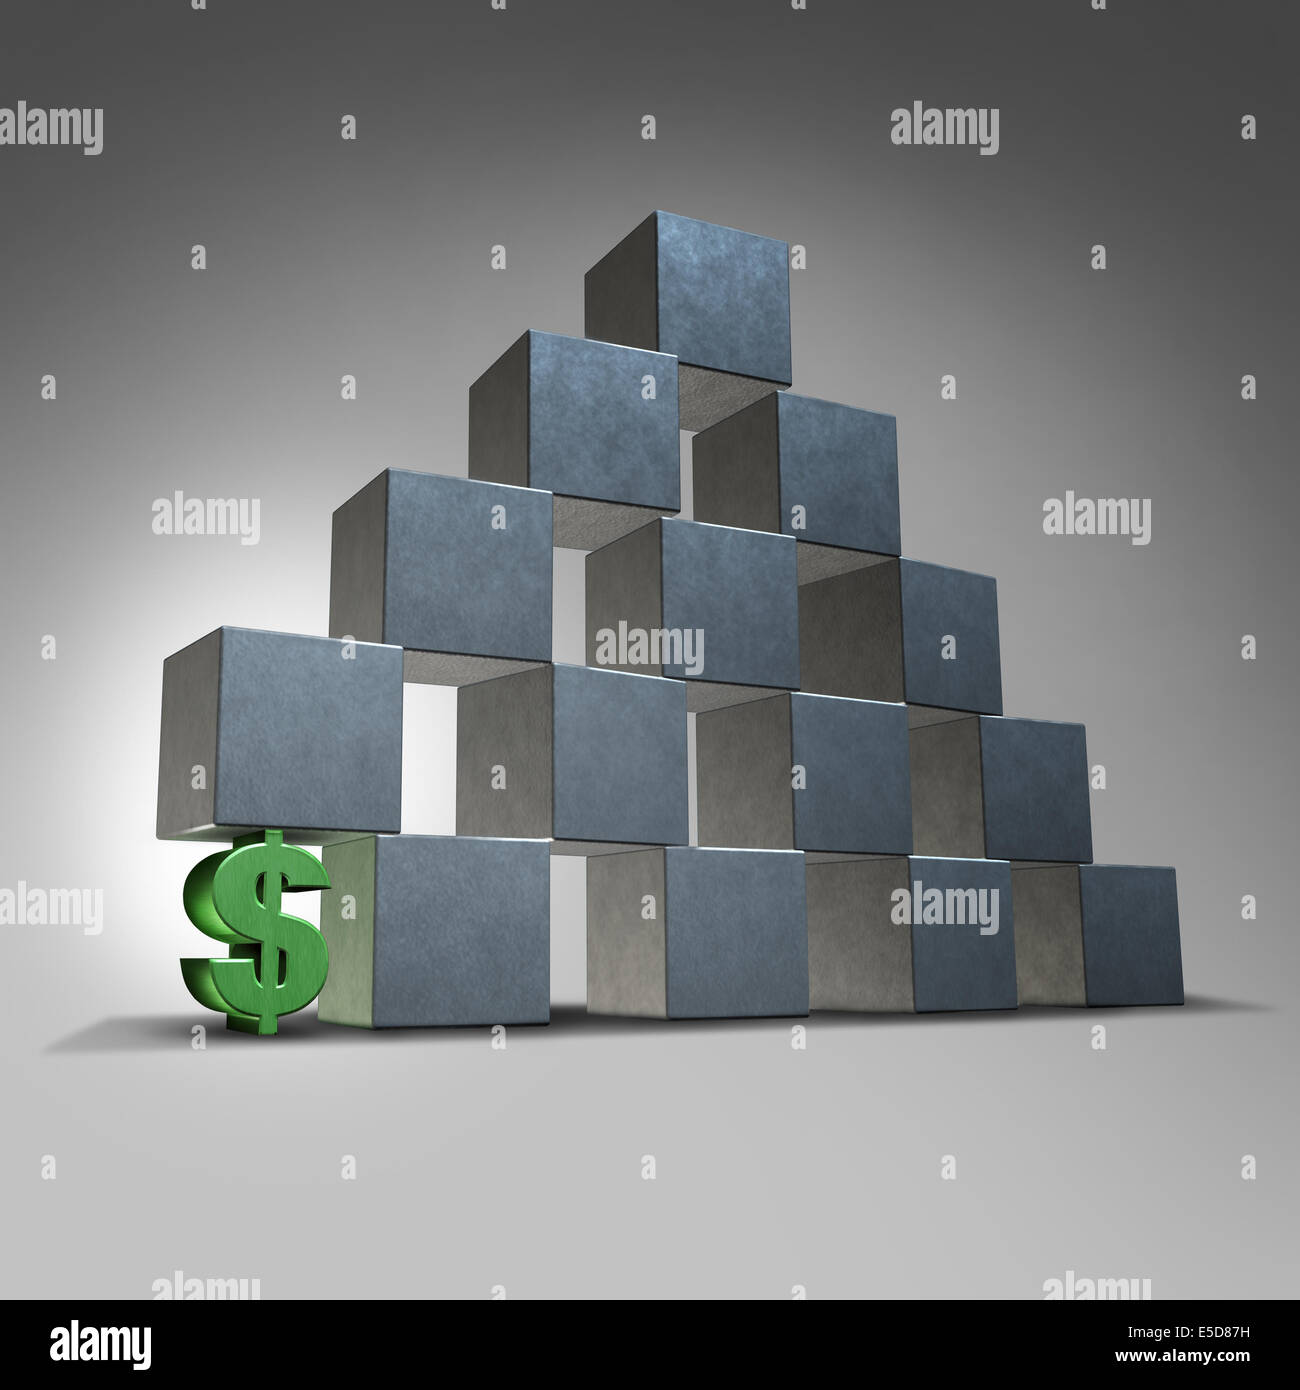 Financial support business concept and finance concept as a three dimensional dollar sign representing investment to support a group of blocks as an icon of a struggling organization or a corporation that needs investing to expand opportunities. Stock Photo